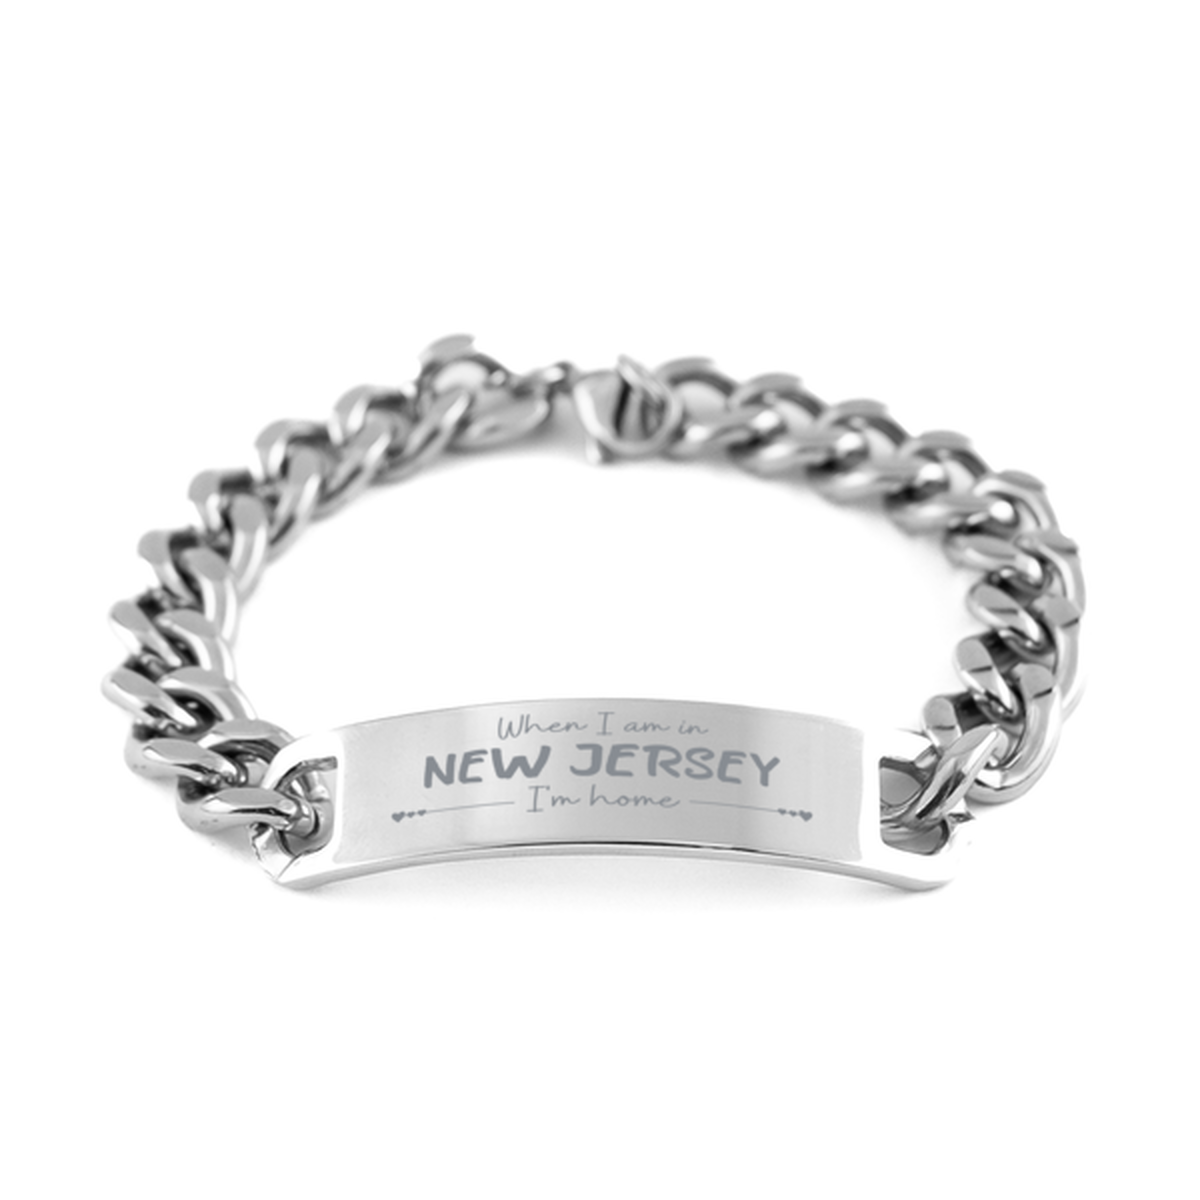 When I am in New Jersey I'm home Cuban Chain Stainless Steel Bracelet, Cheap Gifts For New Jersey, State New Jersey Birthday Gifts for Friends Coworker